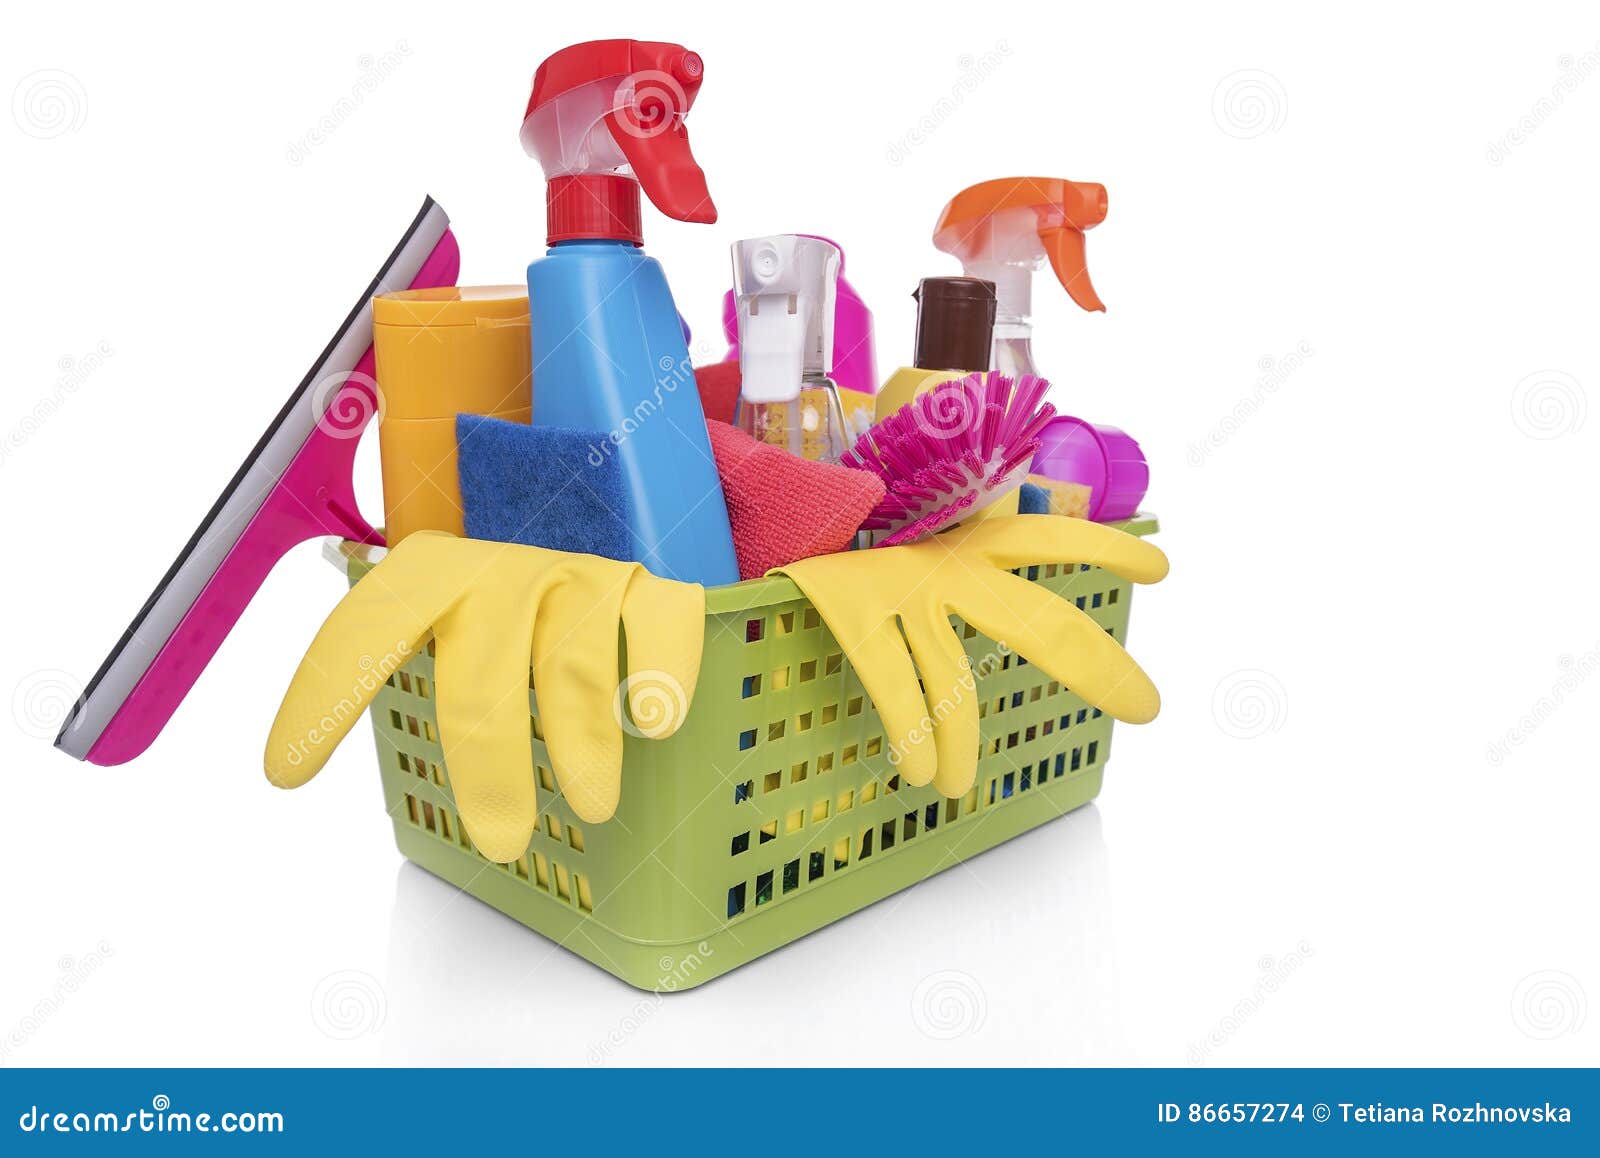 Basket with cleaning products on blue background. Cleaning with